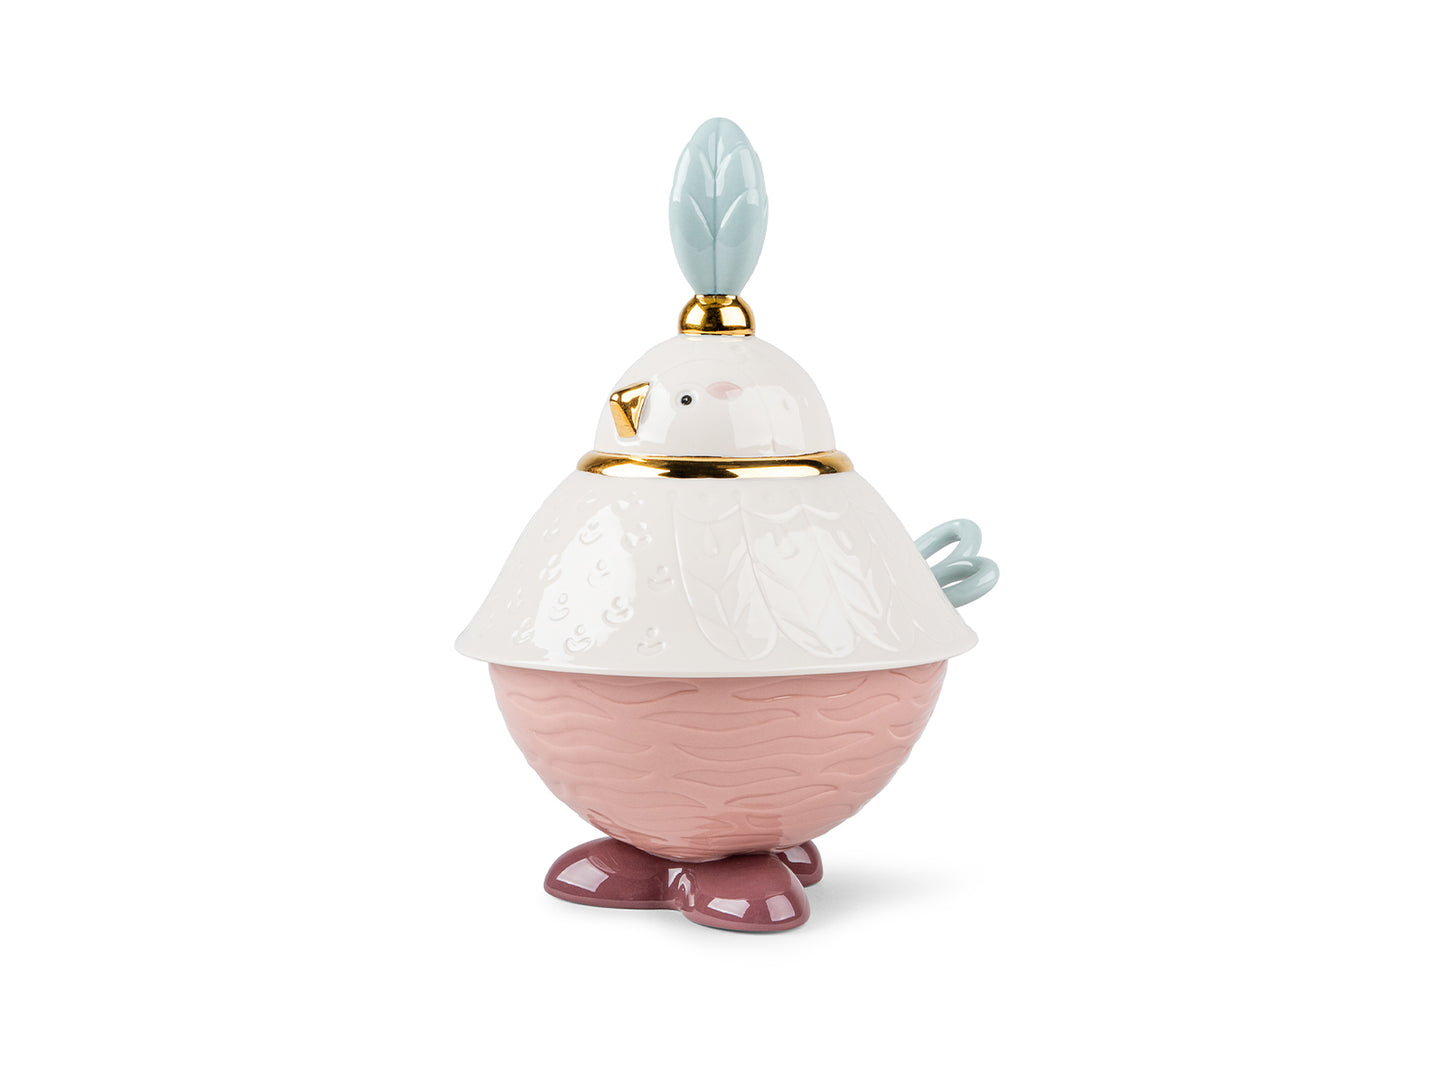 A covered sugar bowl in the shape of a stylised bird, complete with feet, a blue tail that is a spoon inside the dish and a white lid with a blue plume at the top of its head that acts as a handle